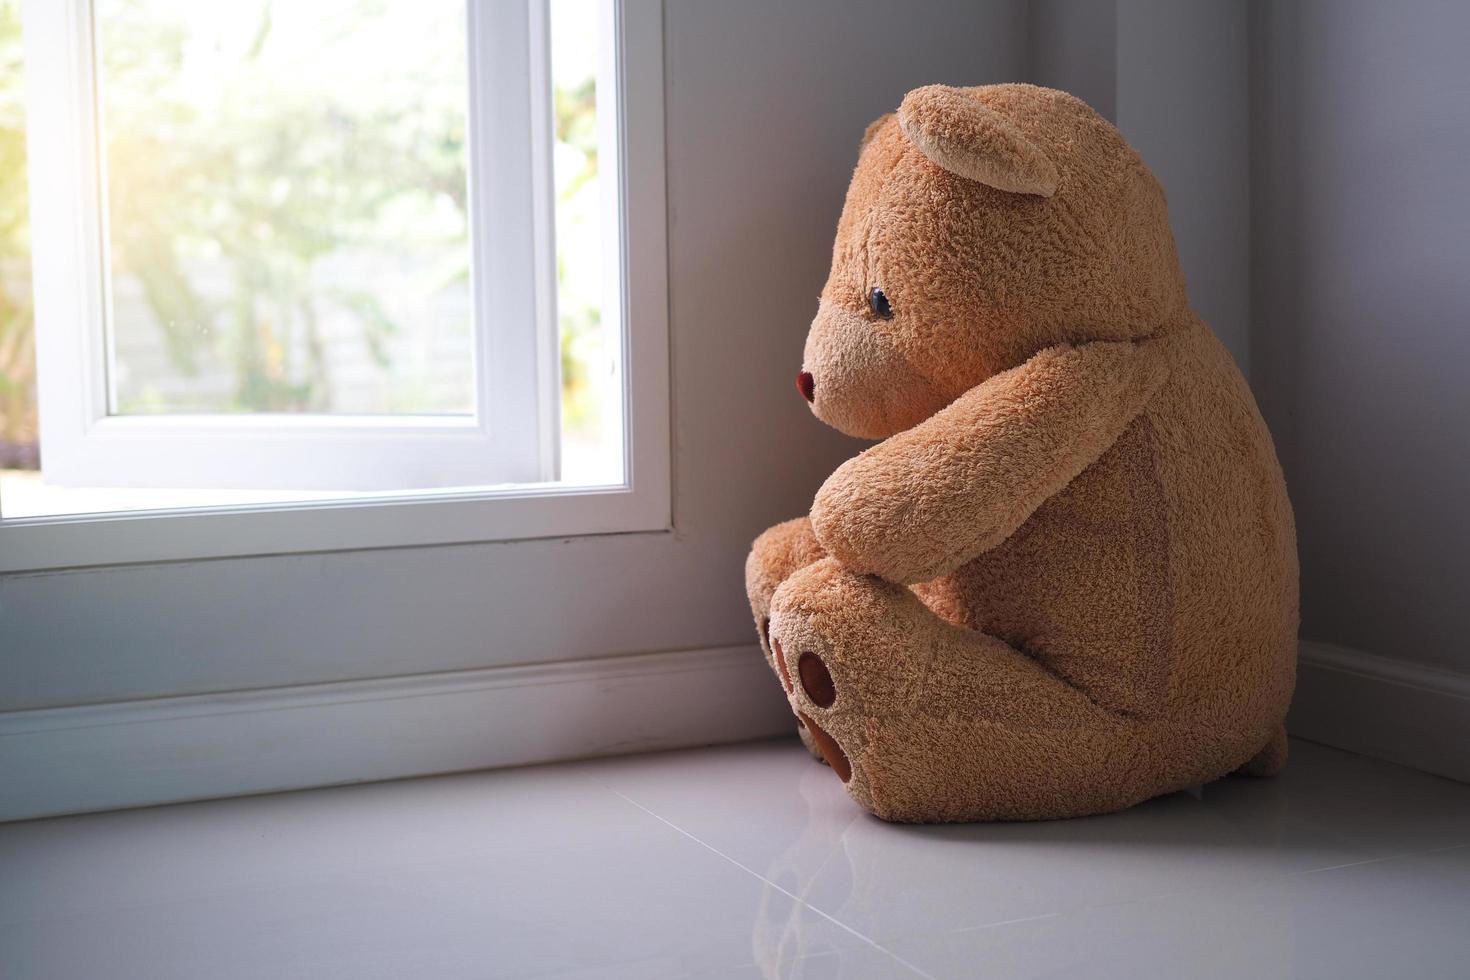 major depressive disorder mdd concept. Grief of children. Teddy bear sitting looking at the house window alone. Looks like someone who is sad, disappointed, depressed photo